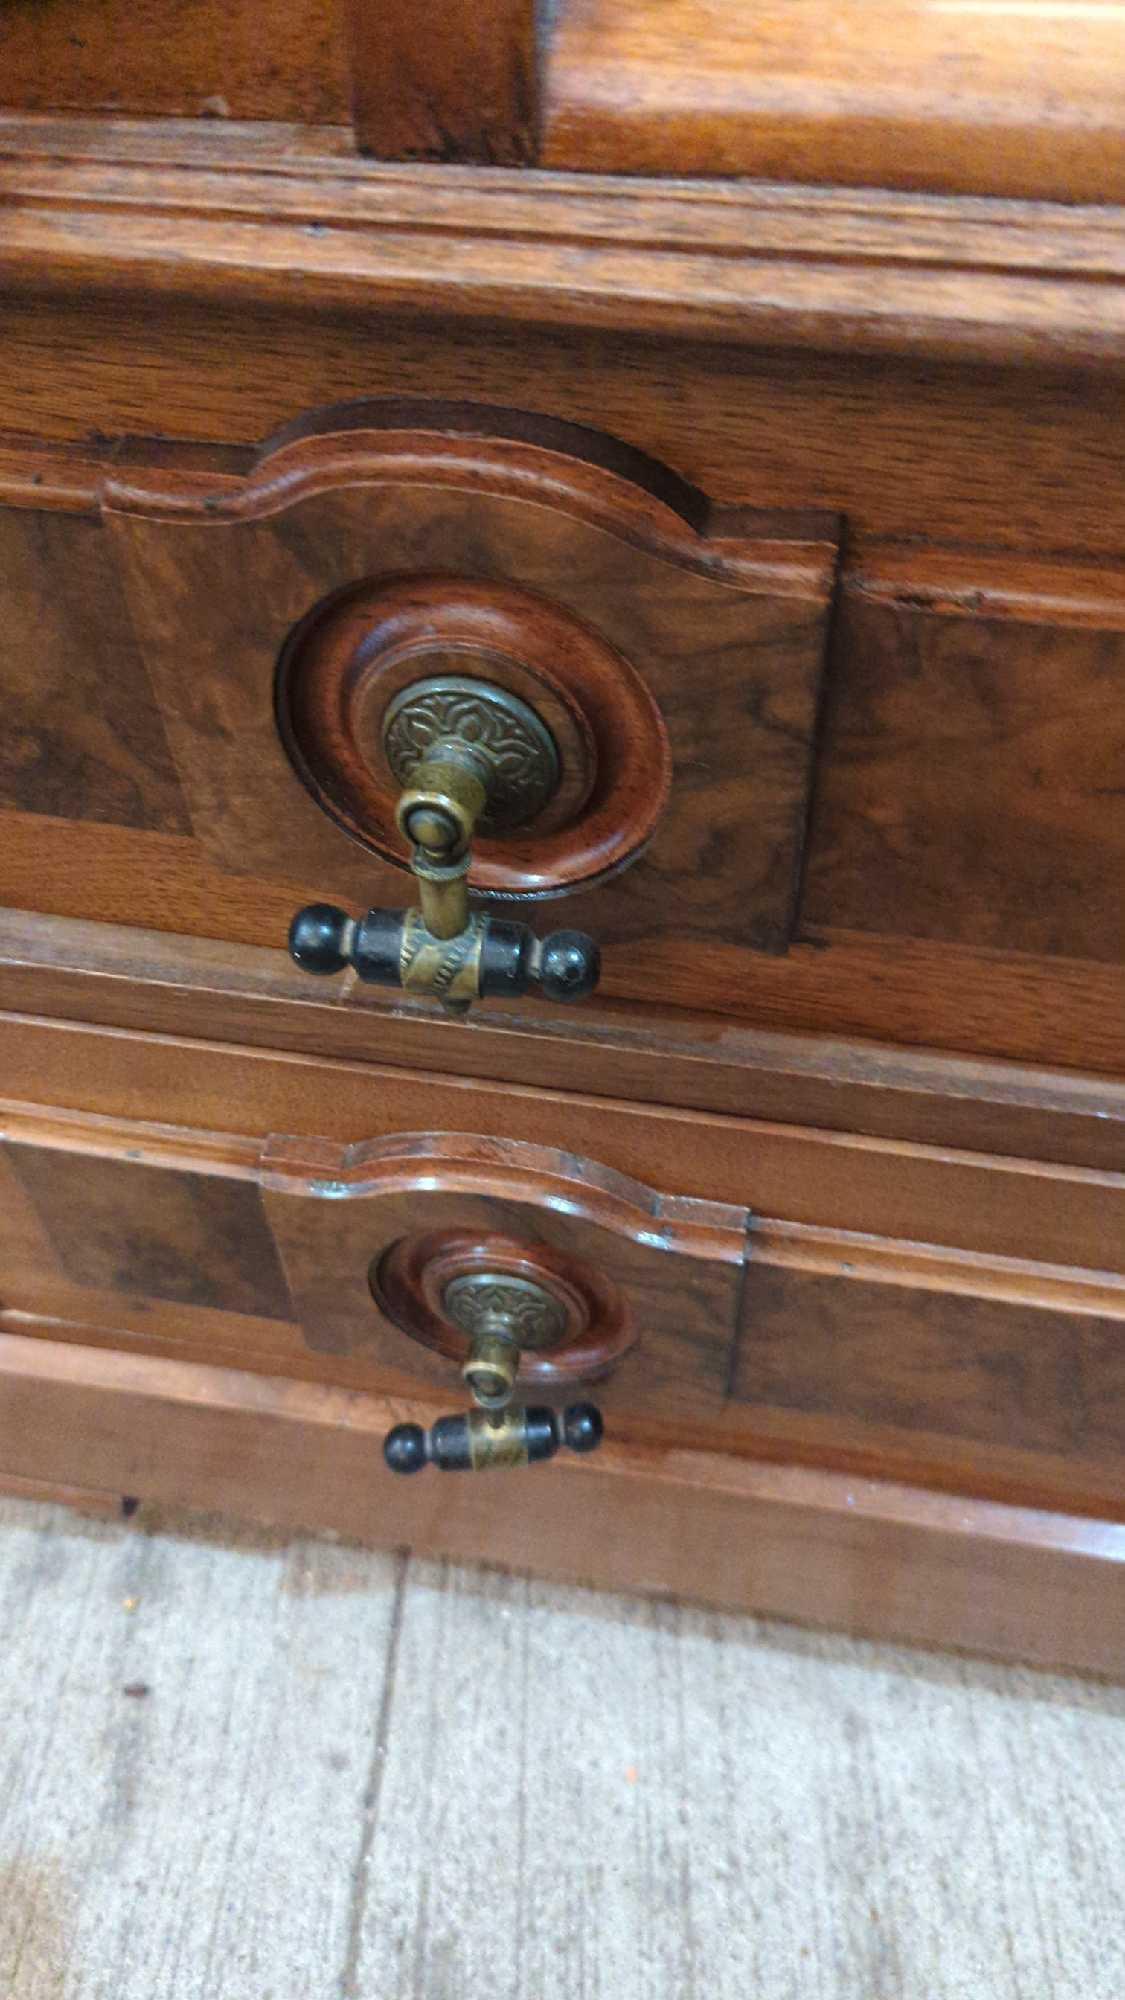 VICTORIAN WALNUT DRESSER WITH MIRROR DIMENSIONS IN PICTURE